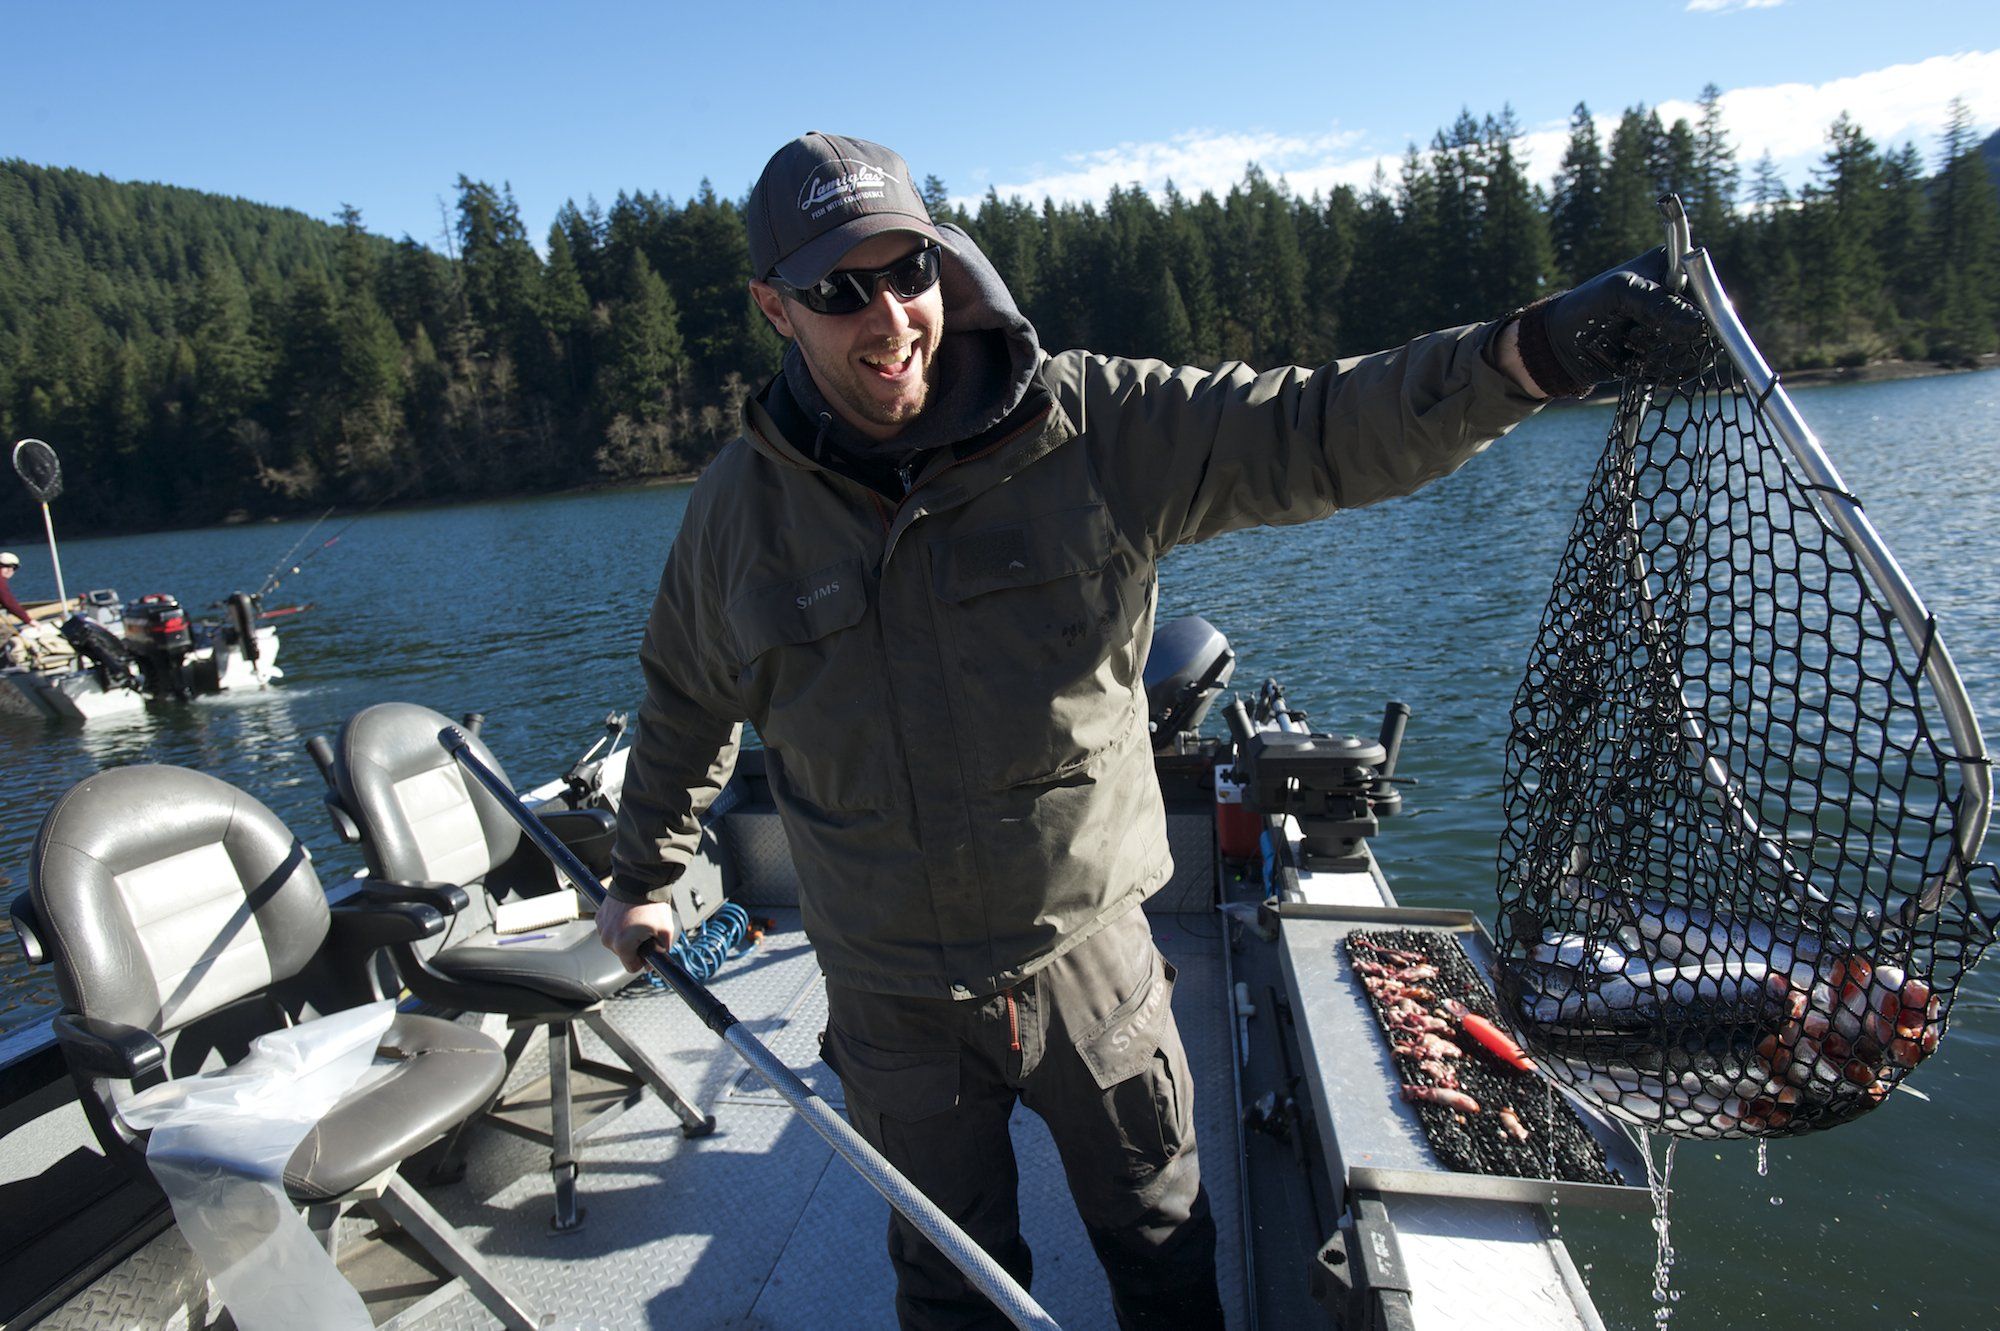 An expert's tips for kokanee fishing | The Seattle Times